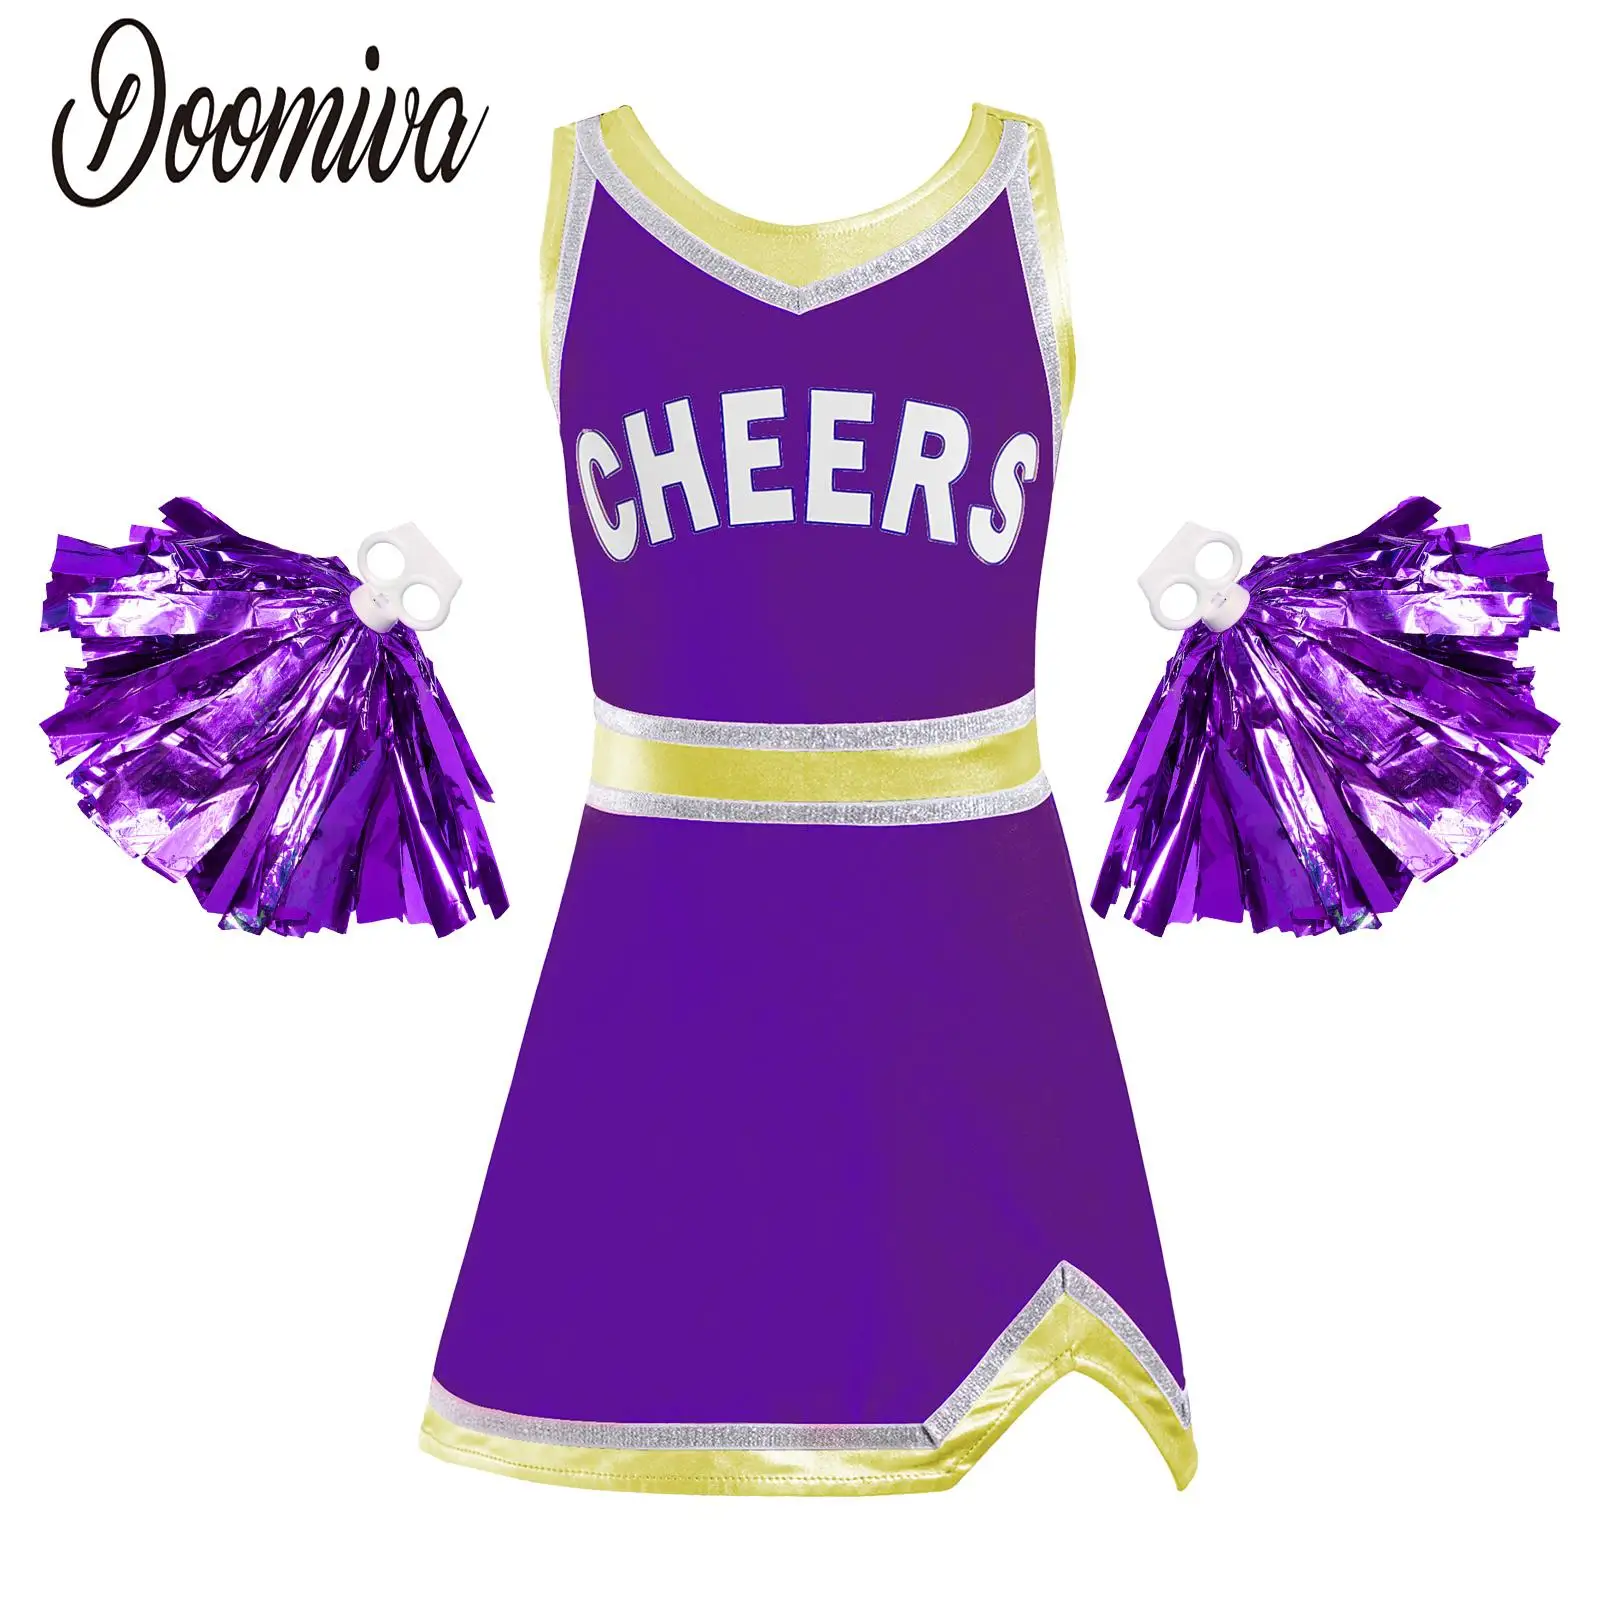 

Children Girls Cheer Cheerleading Outfits Schoolgirl Uniform Sleeveless Dress with 1 Pair Pompoms Carnival Party Dance Costume